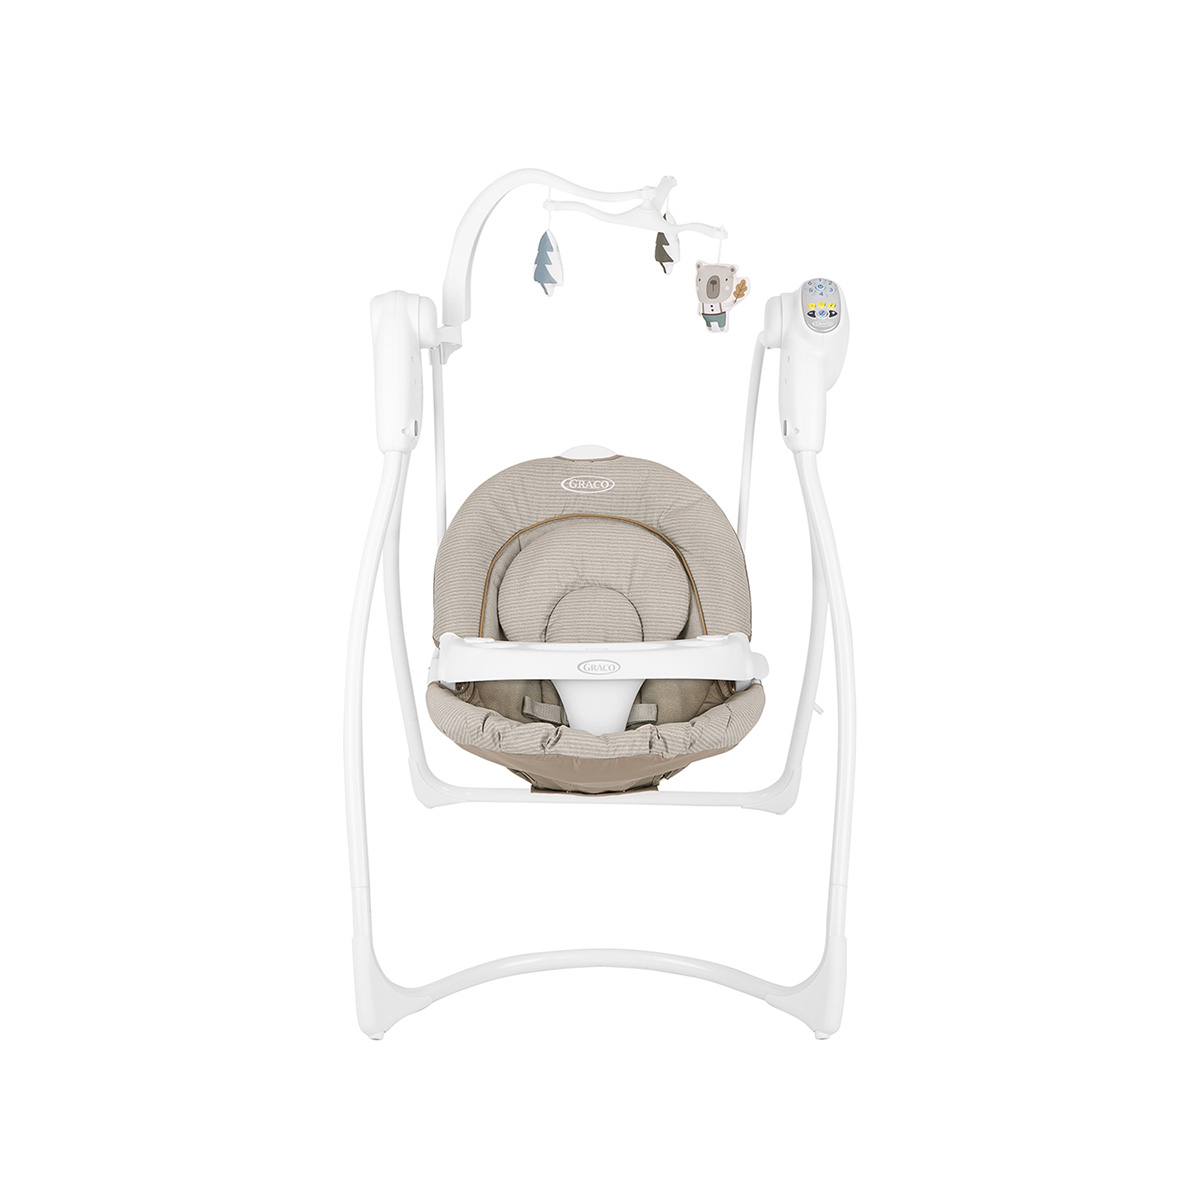 Graco Move With Me Baby Swing | Compact & Easily Portable